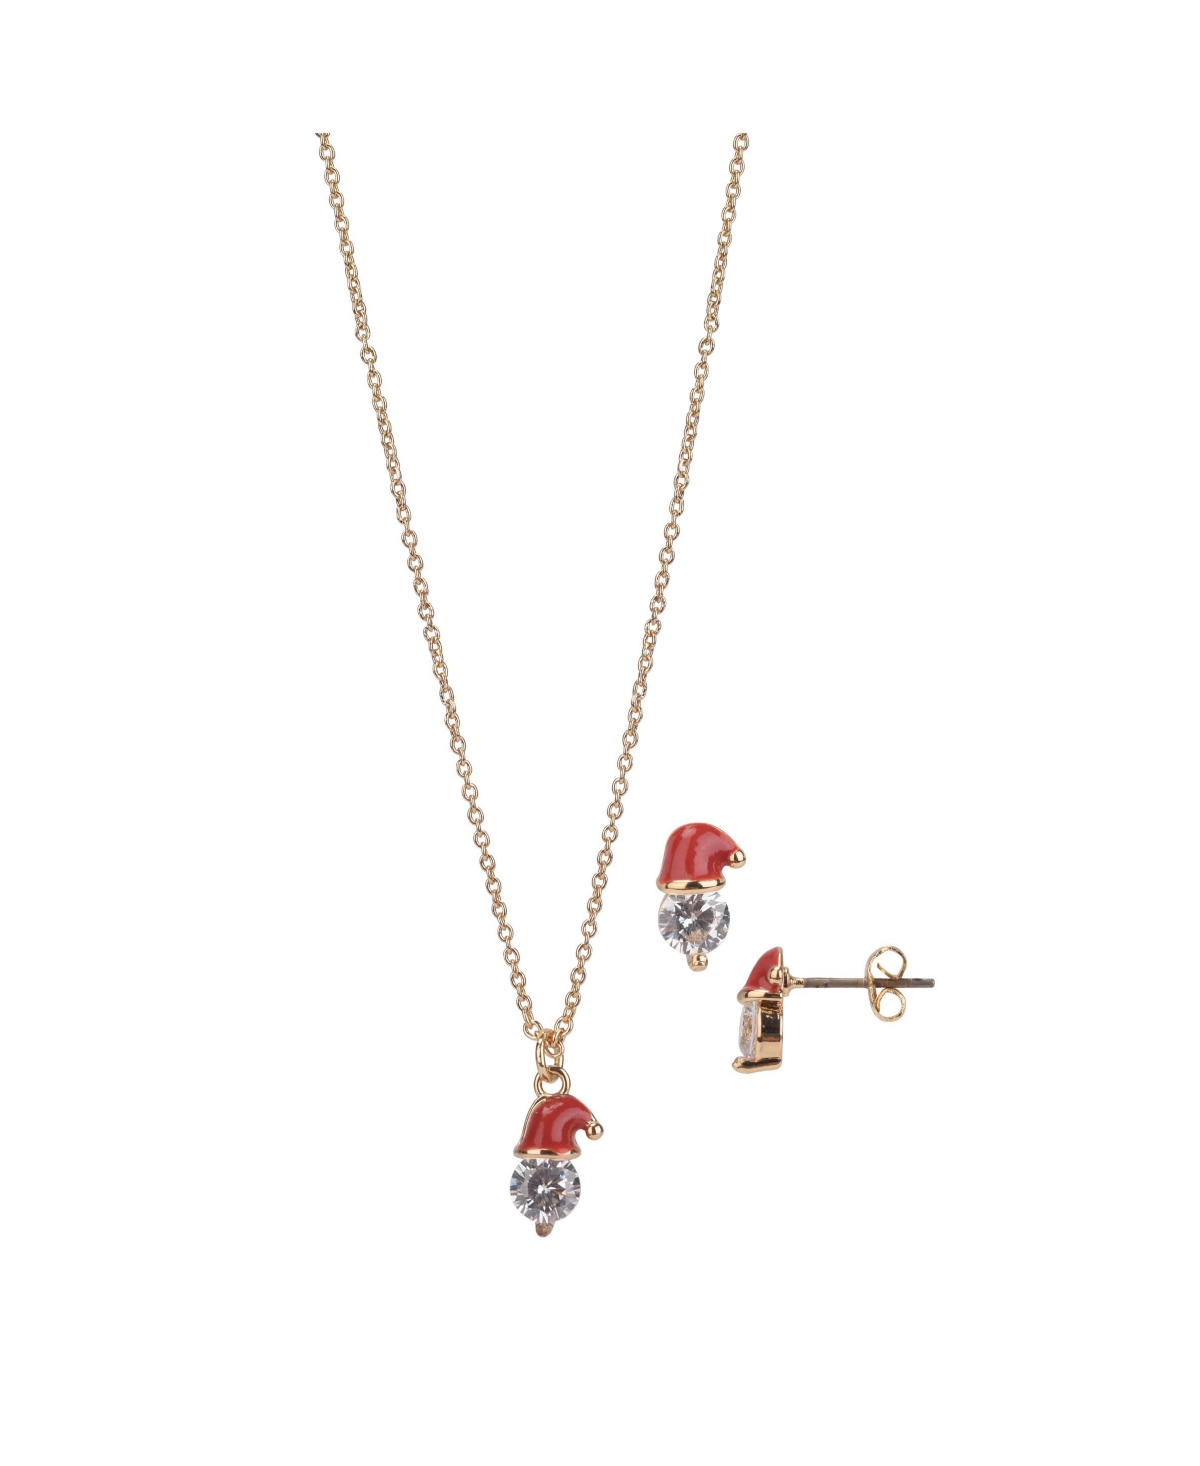 Fao Schwarz Santa Hat Necklace And Earring Set, 3 Pieces In Gold